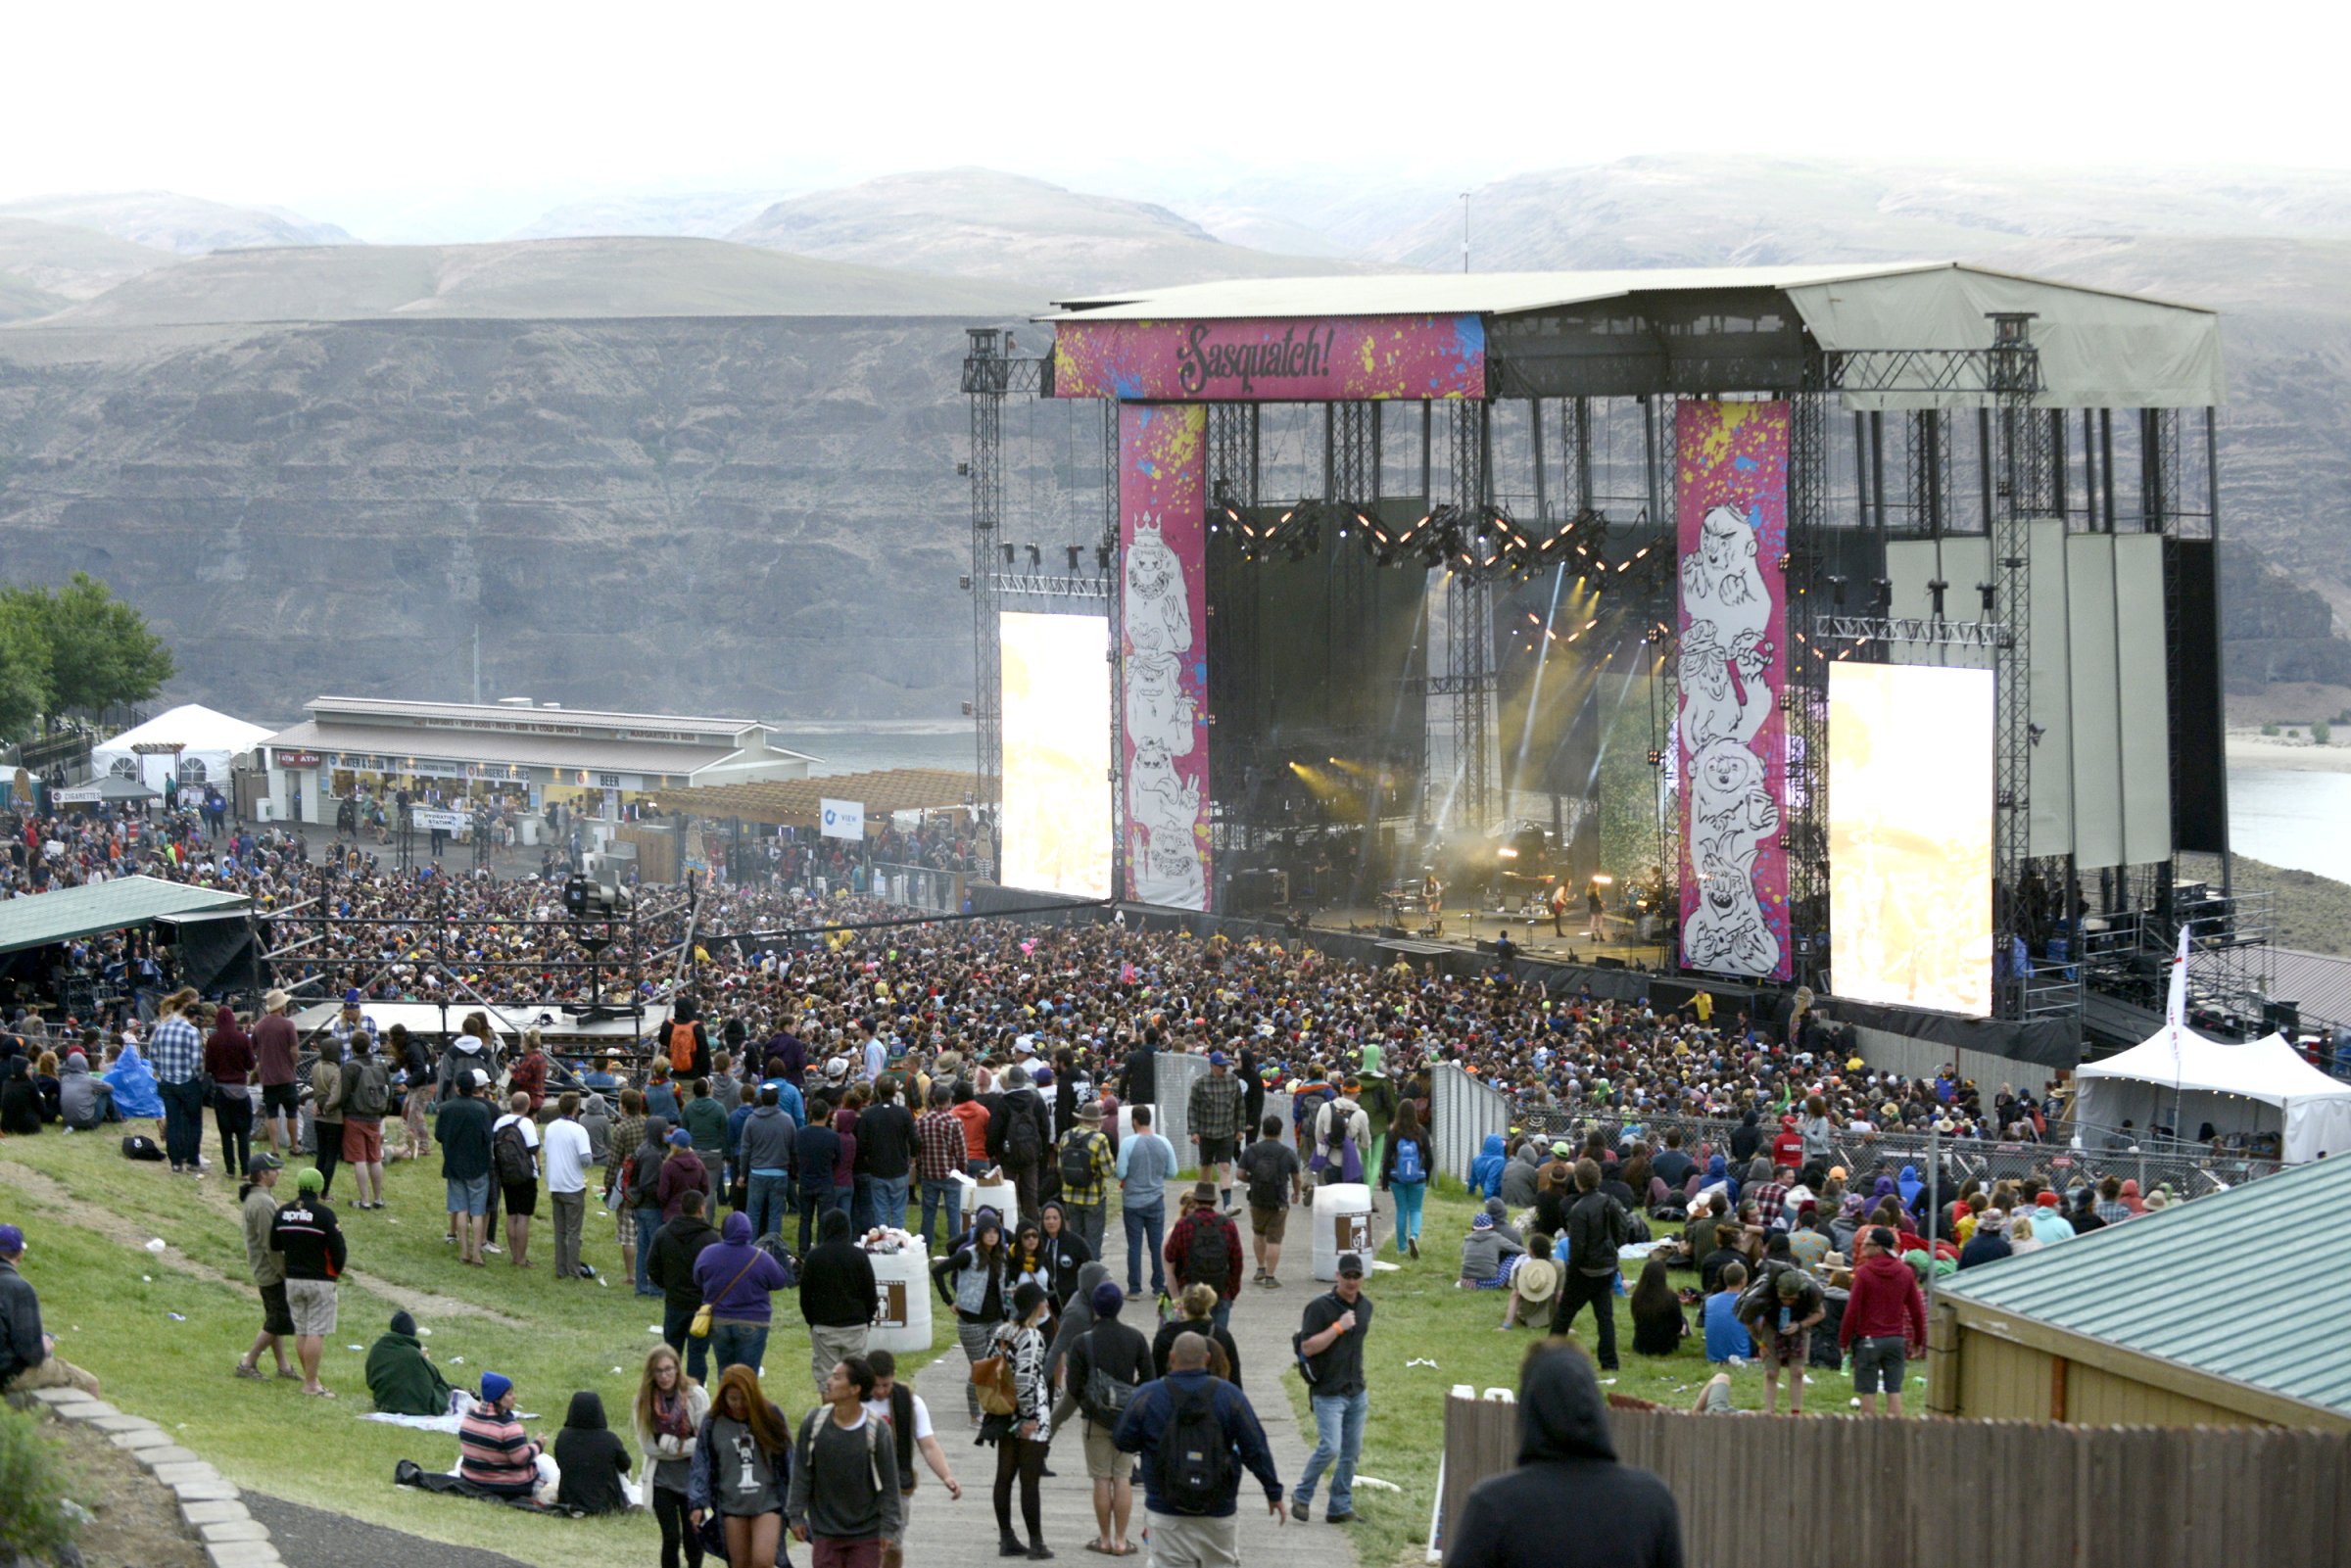 The crowd as HAIM performs during the Saquatch! Music Festival at the Gorge Amphitheater on May 25, 2014 in George, Washington